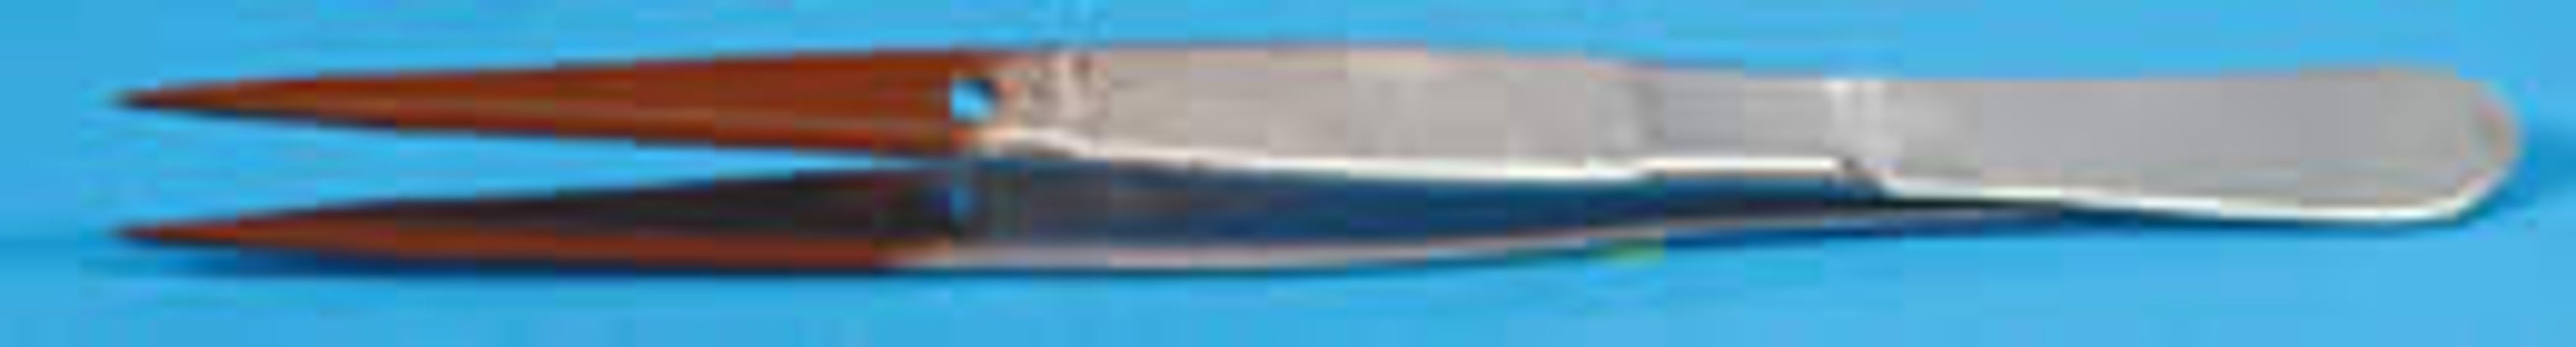 Model 72973 - Nickel-Plated Forceps with PTFE Coated Tips